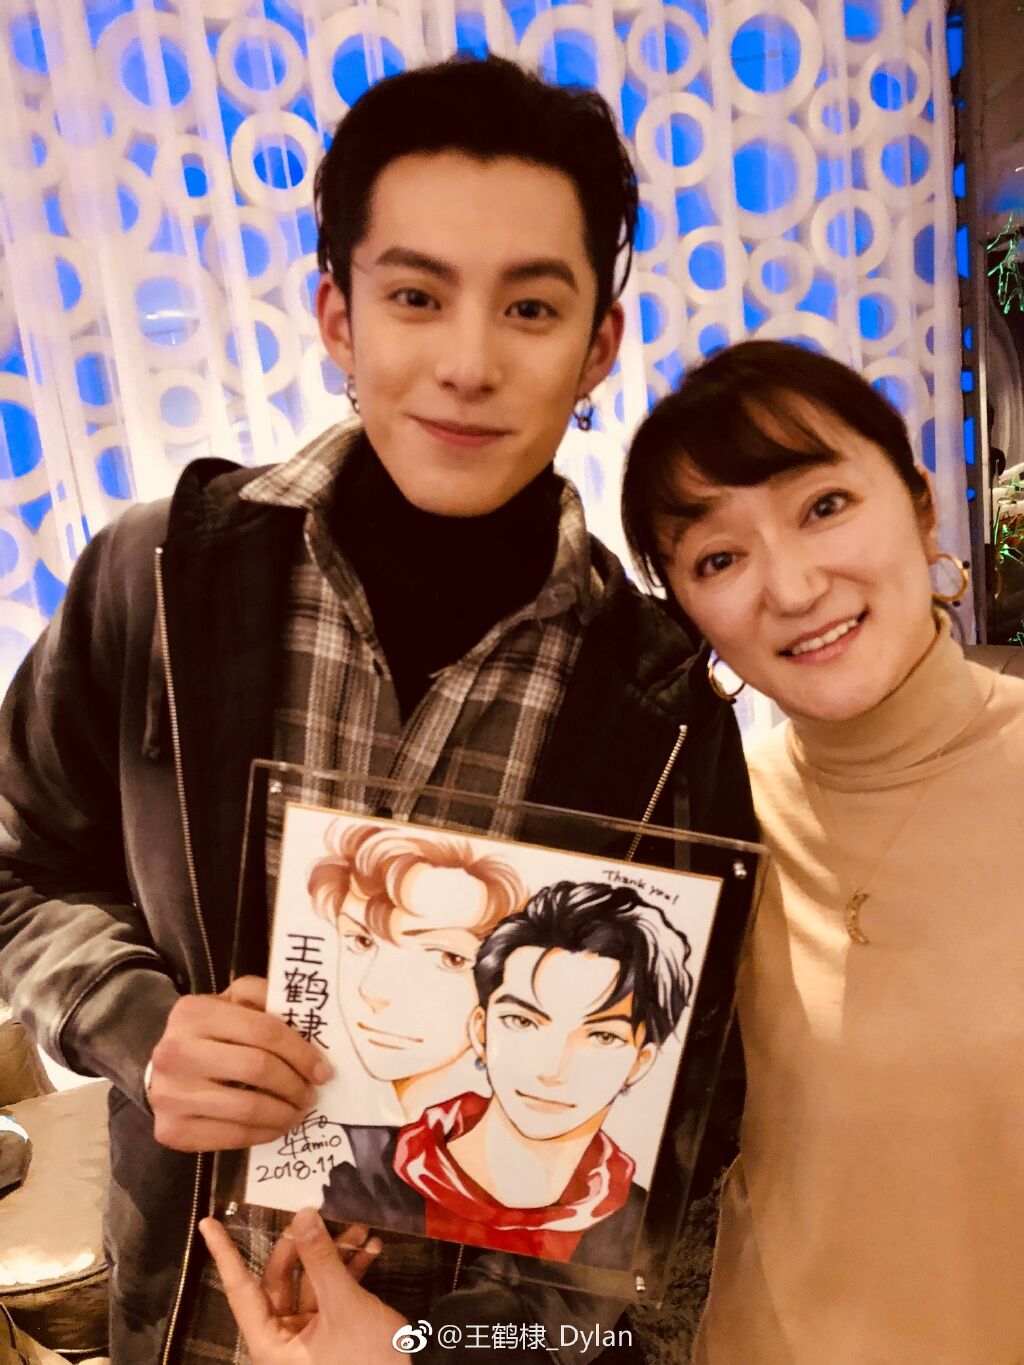 dylan wang ♡ on X: didi in age 18, 19 and 20! HE LOOKS YOUNGER